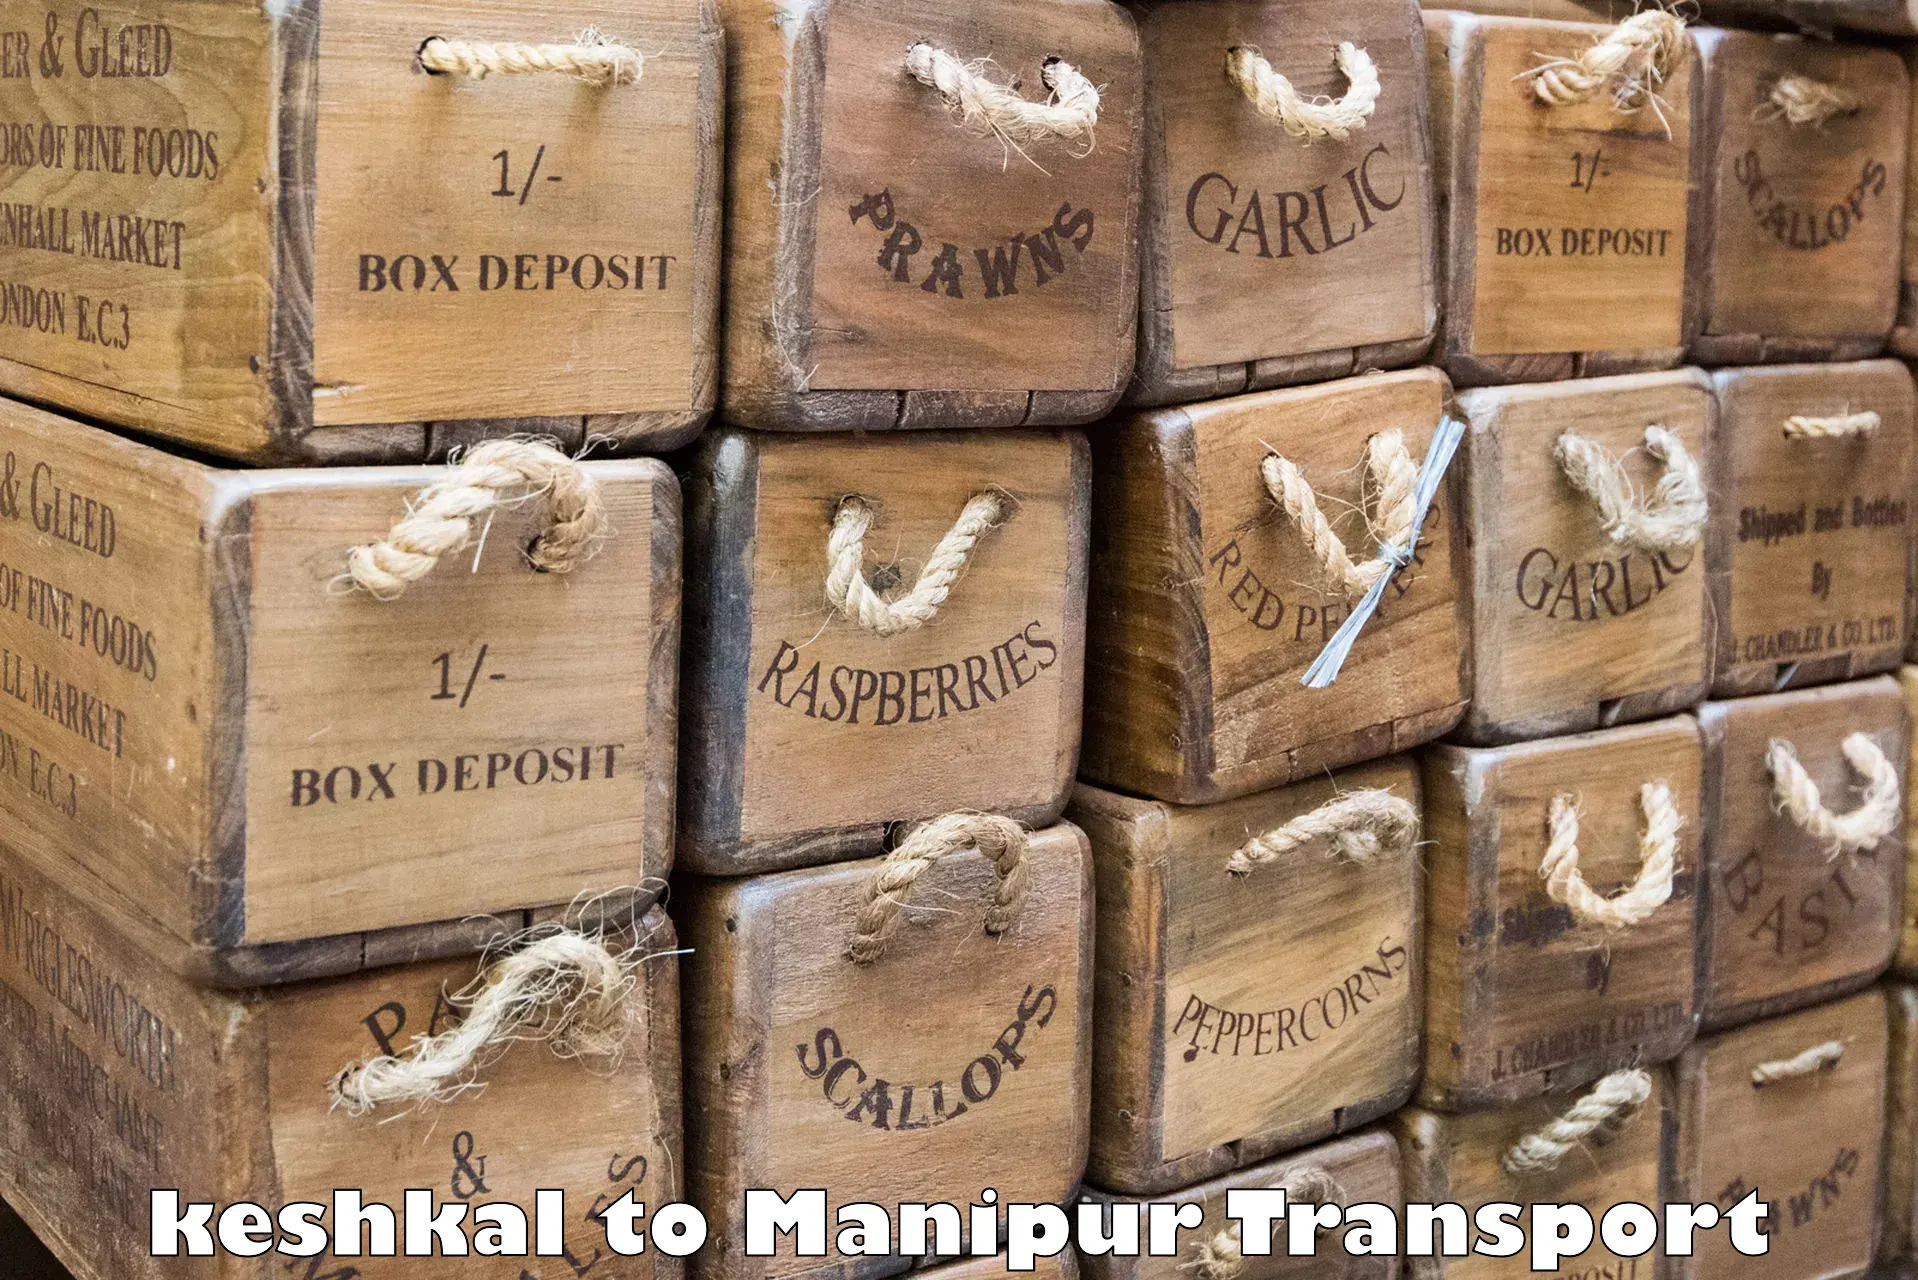 Express transport services keshkal to Manipur